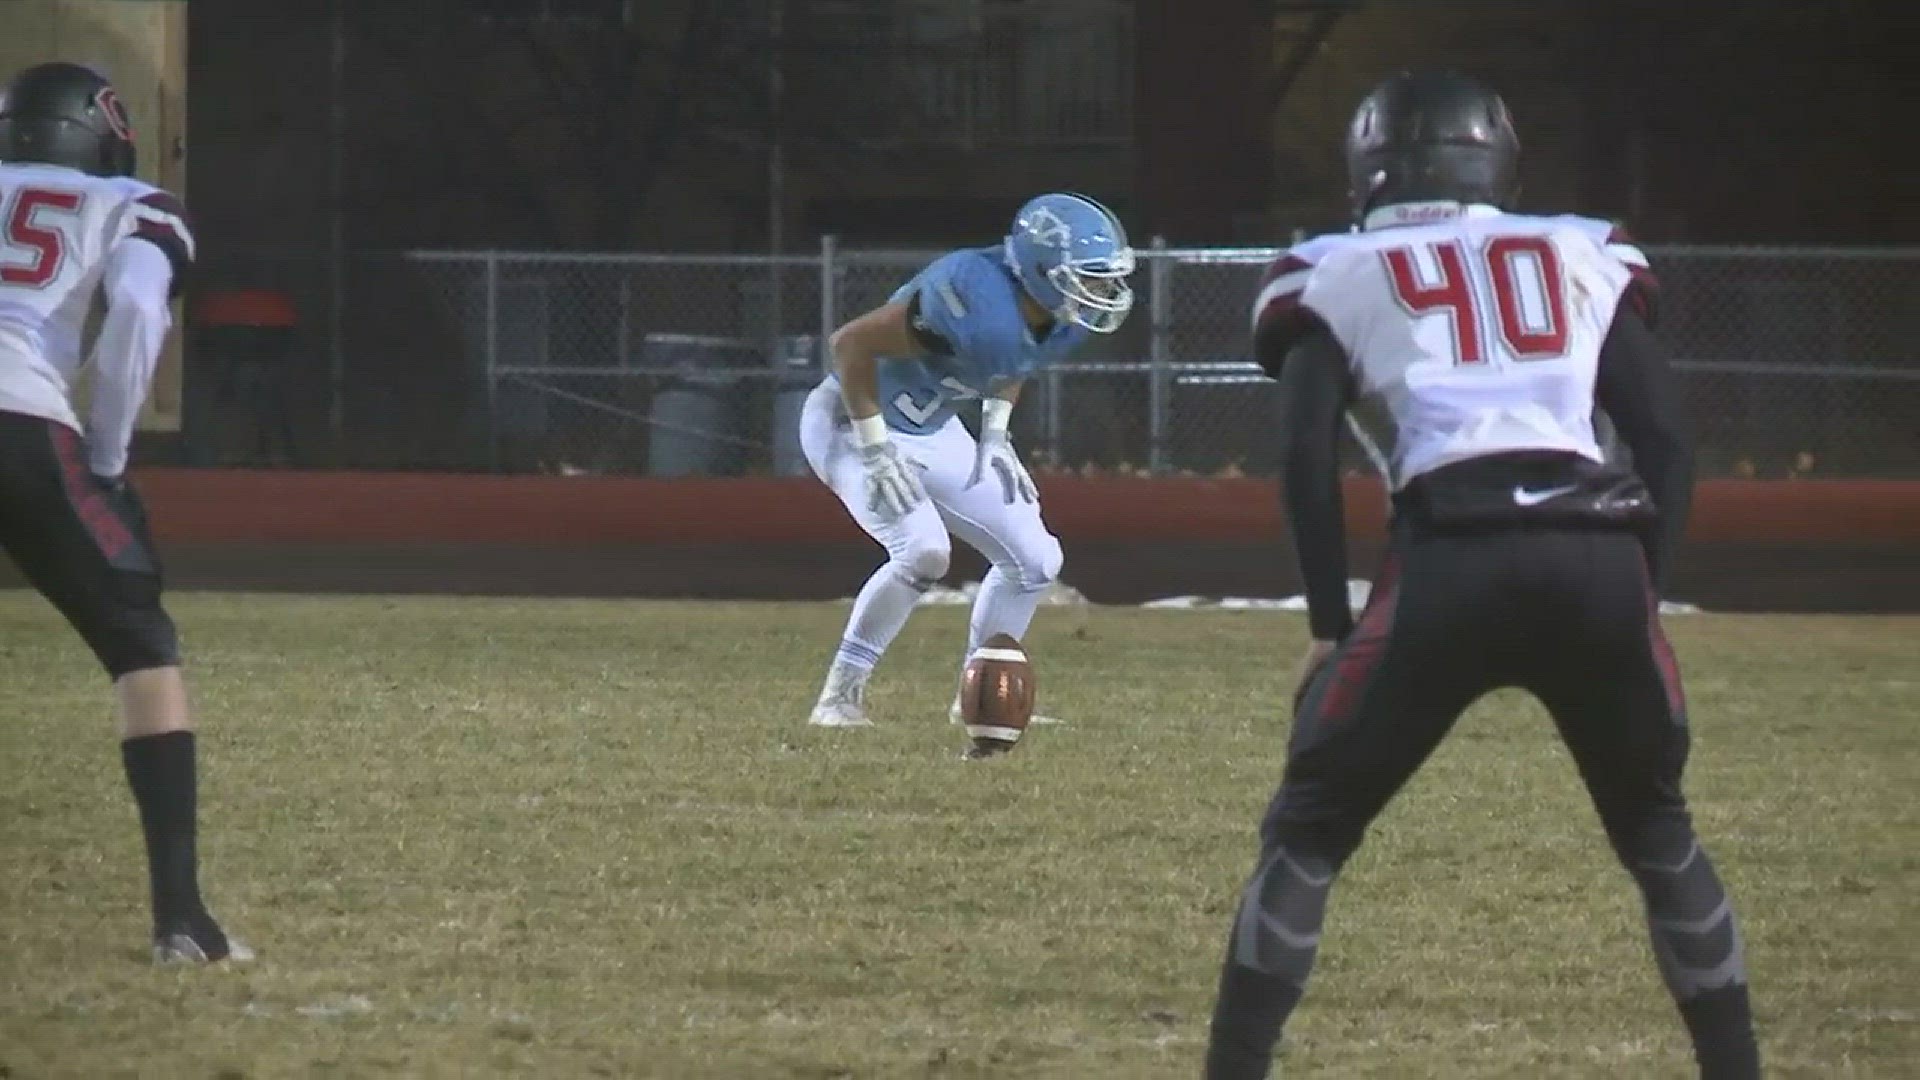 Highlights of Central Valley's 22-15 win over defending state champion Camas in the second round of the playoffs on Nov. 10, 2017. Highlights courtesy of KREM.